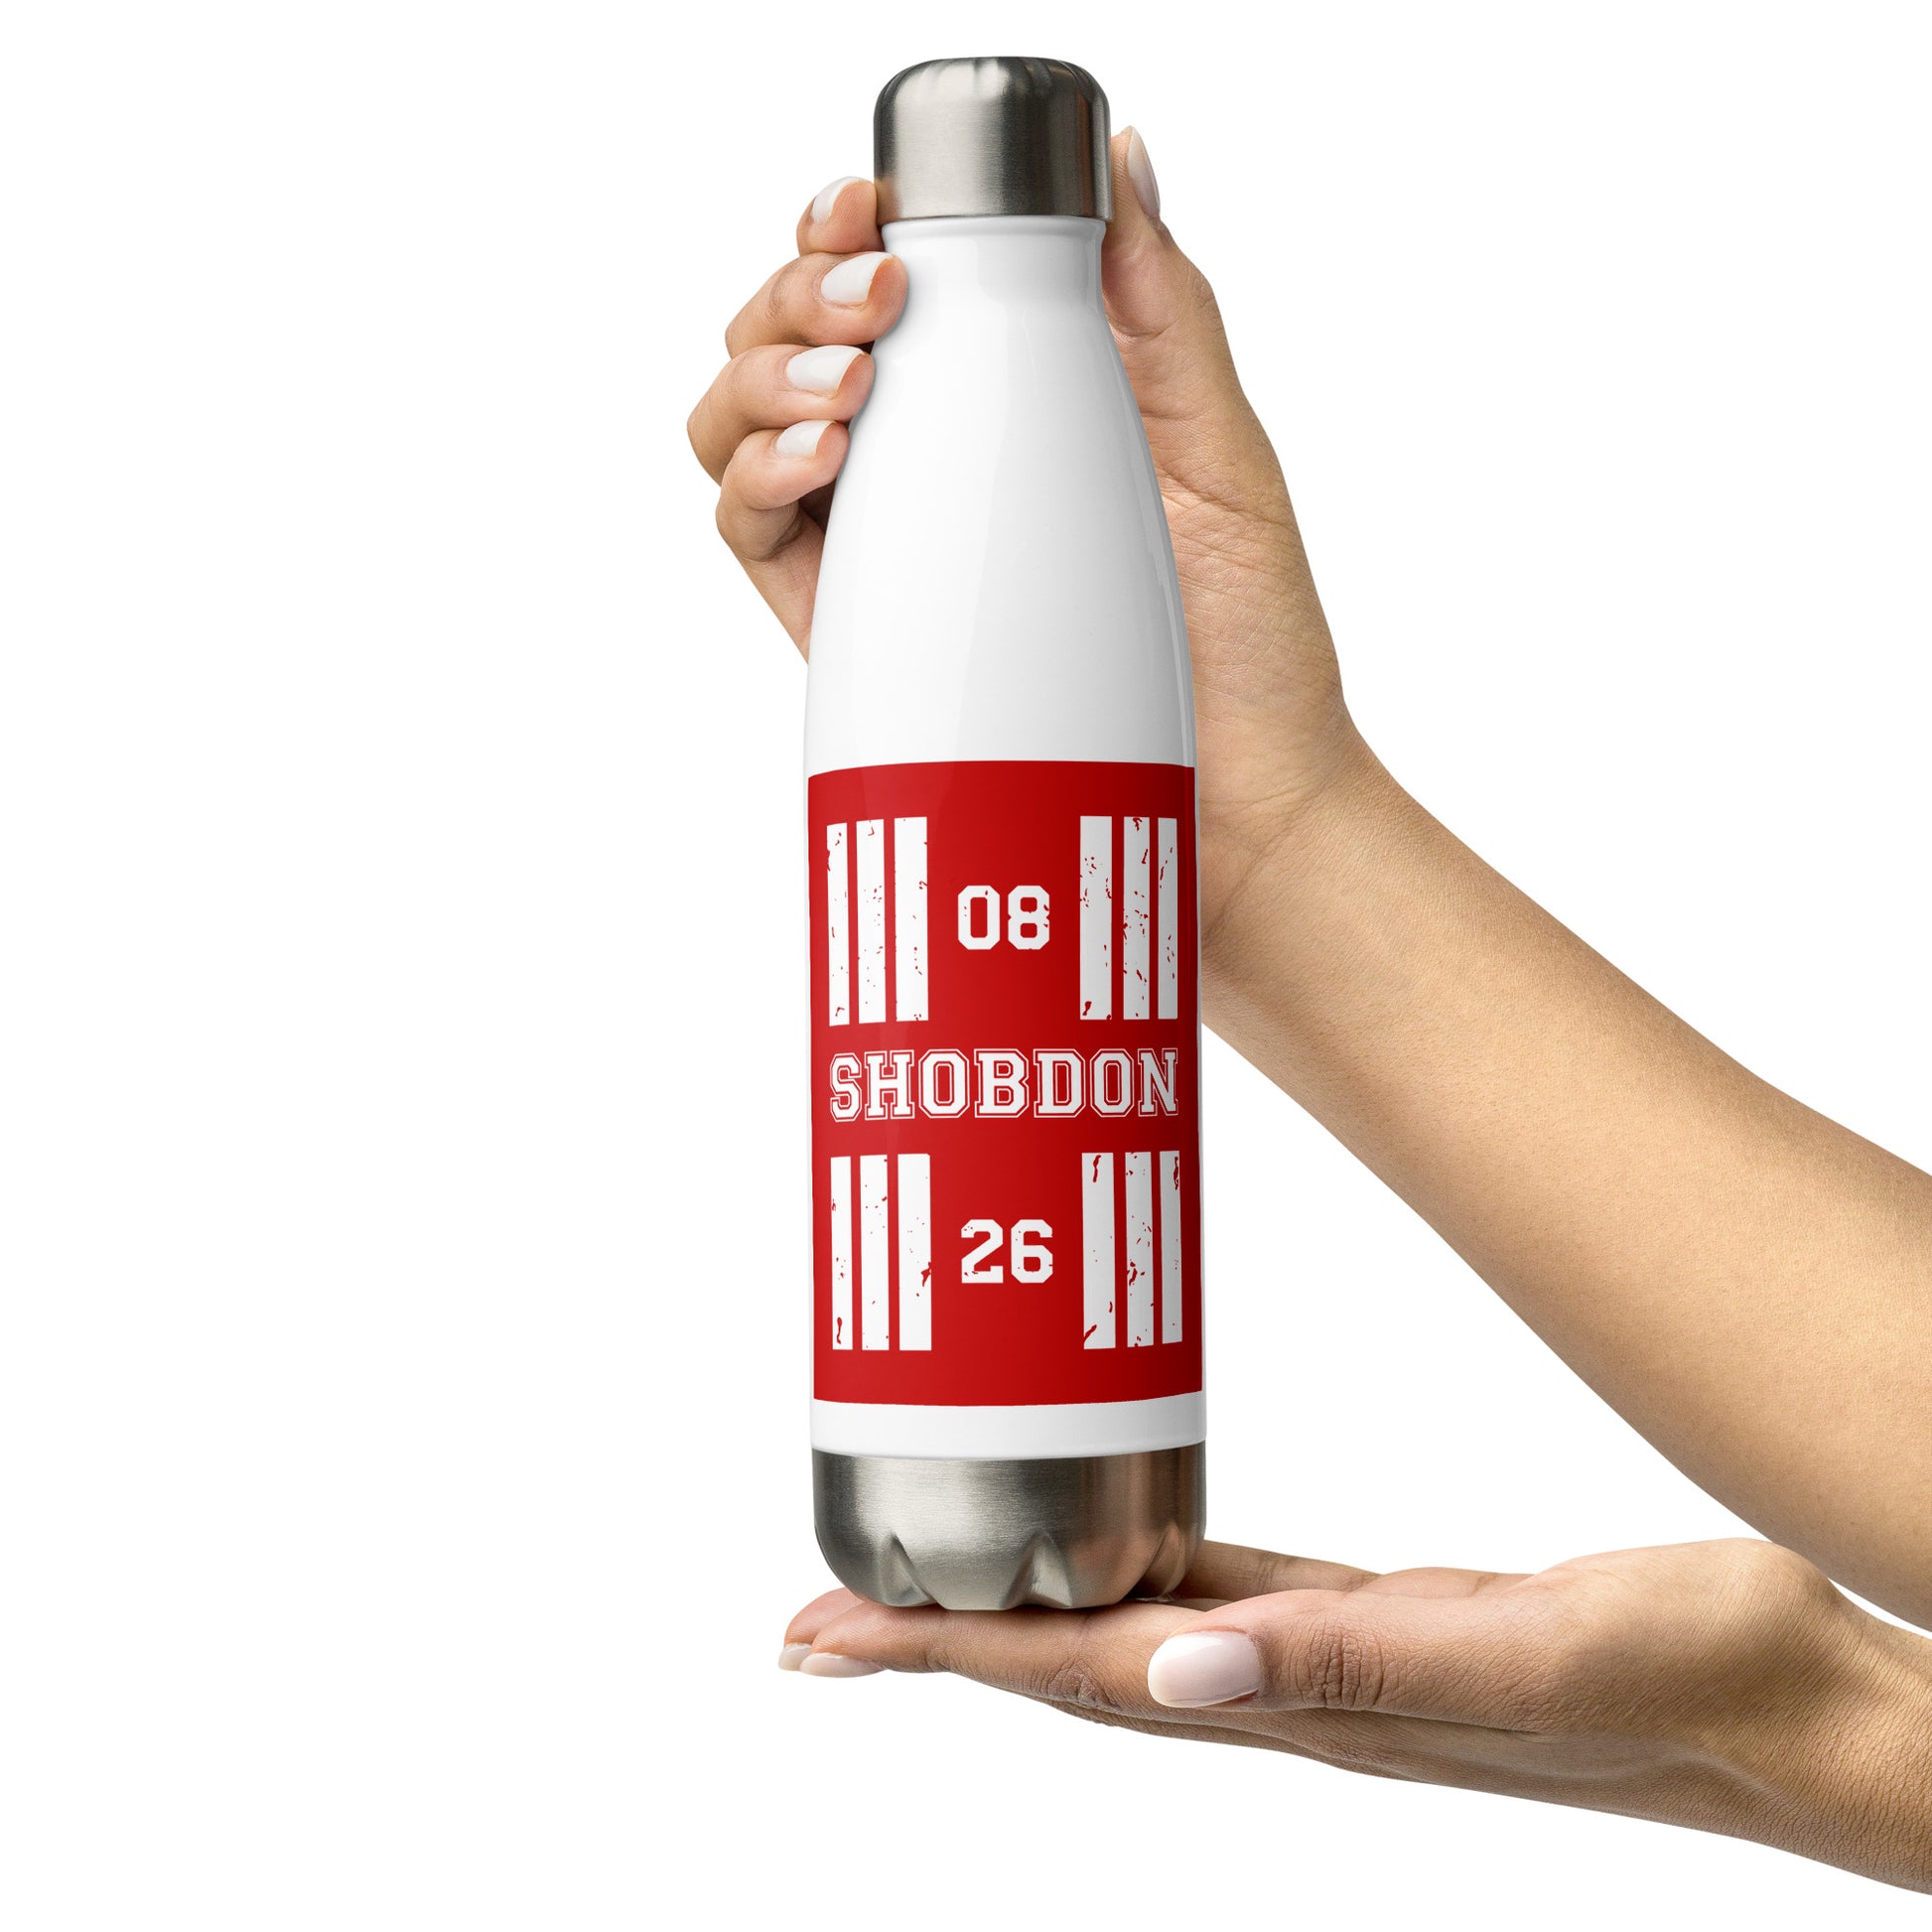 The Shobdon Aerodrome runway designator water bottle features a red print with the airport's name and designator framed by stylised threshold markings showing through.